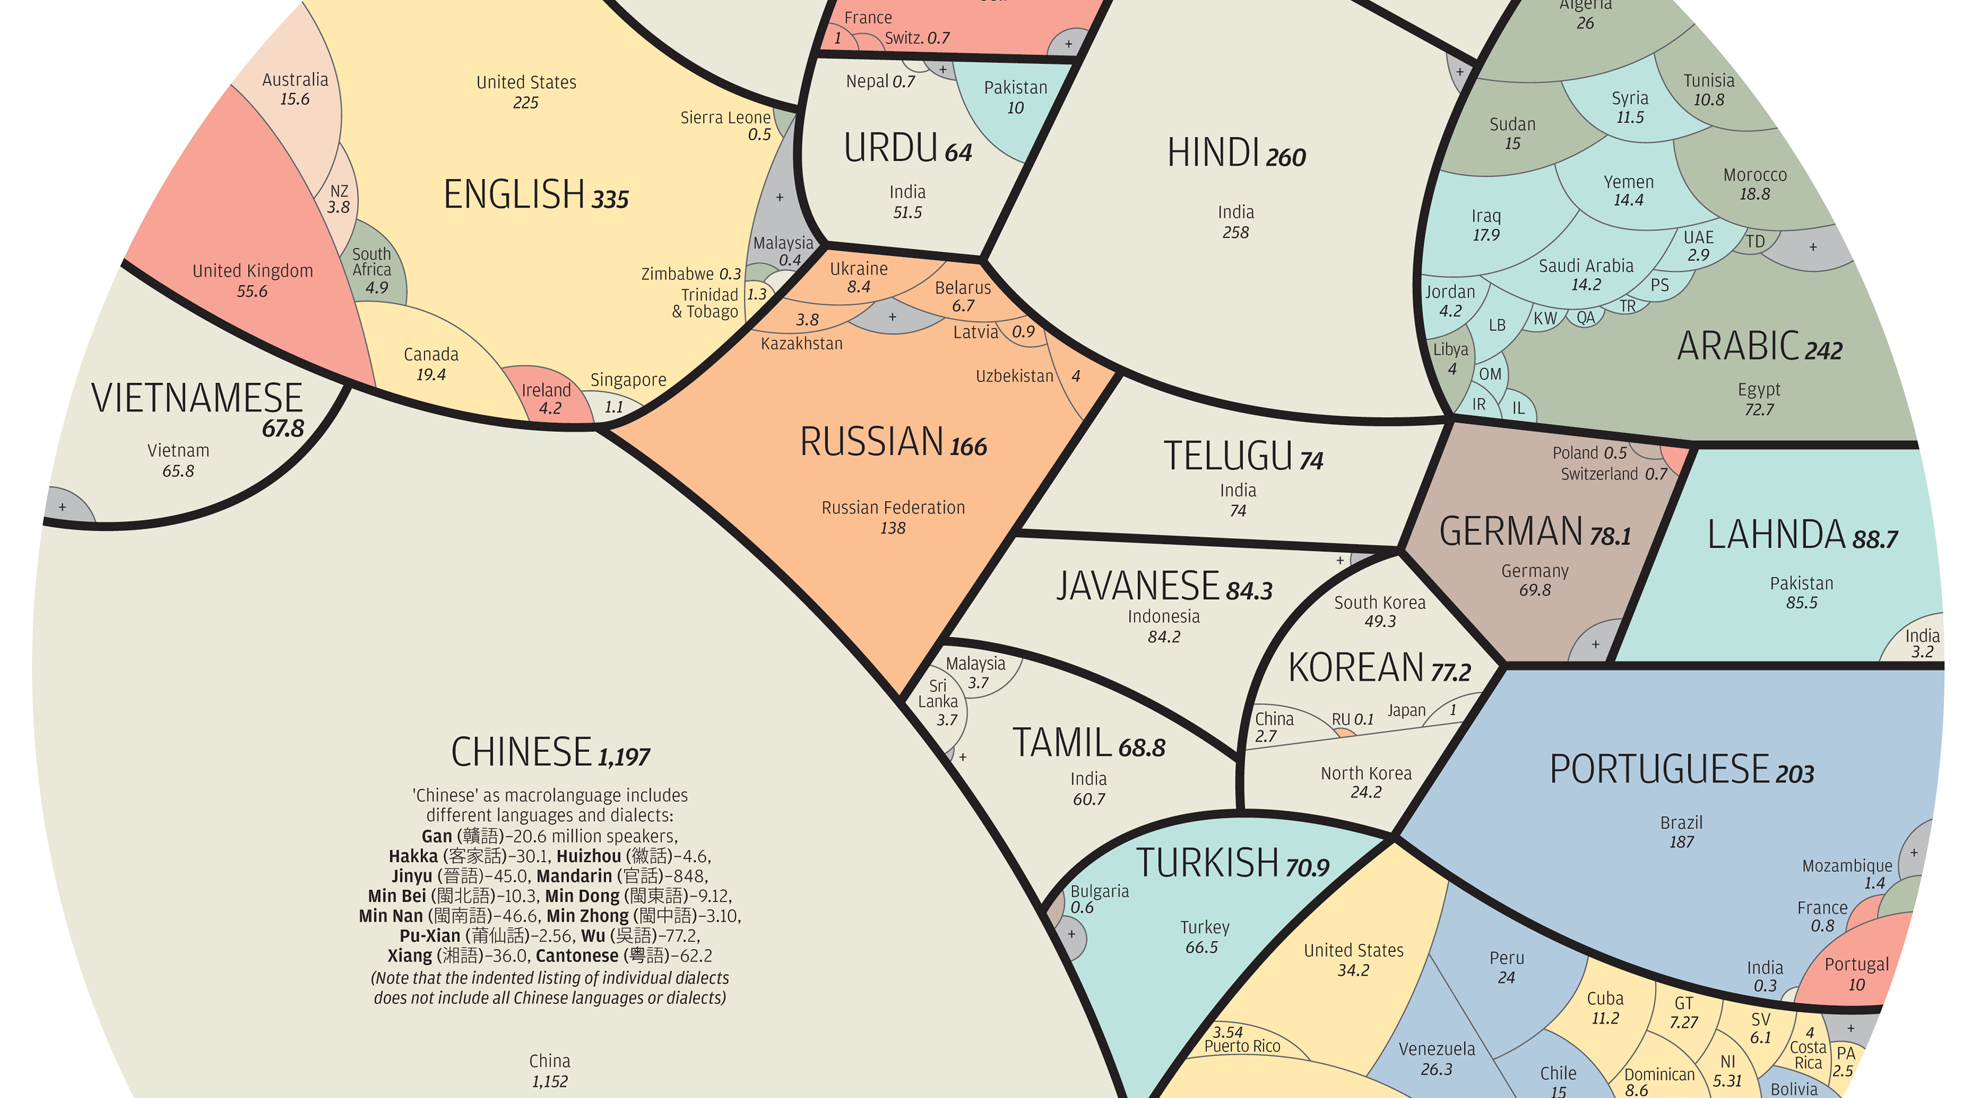 All World Languages in One Visualization, By Native Speakers